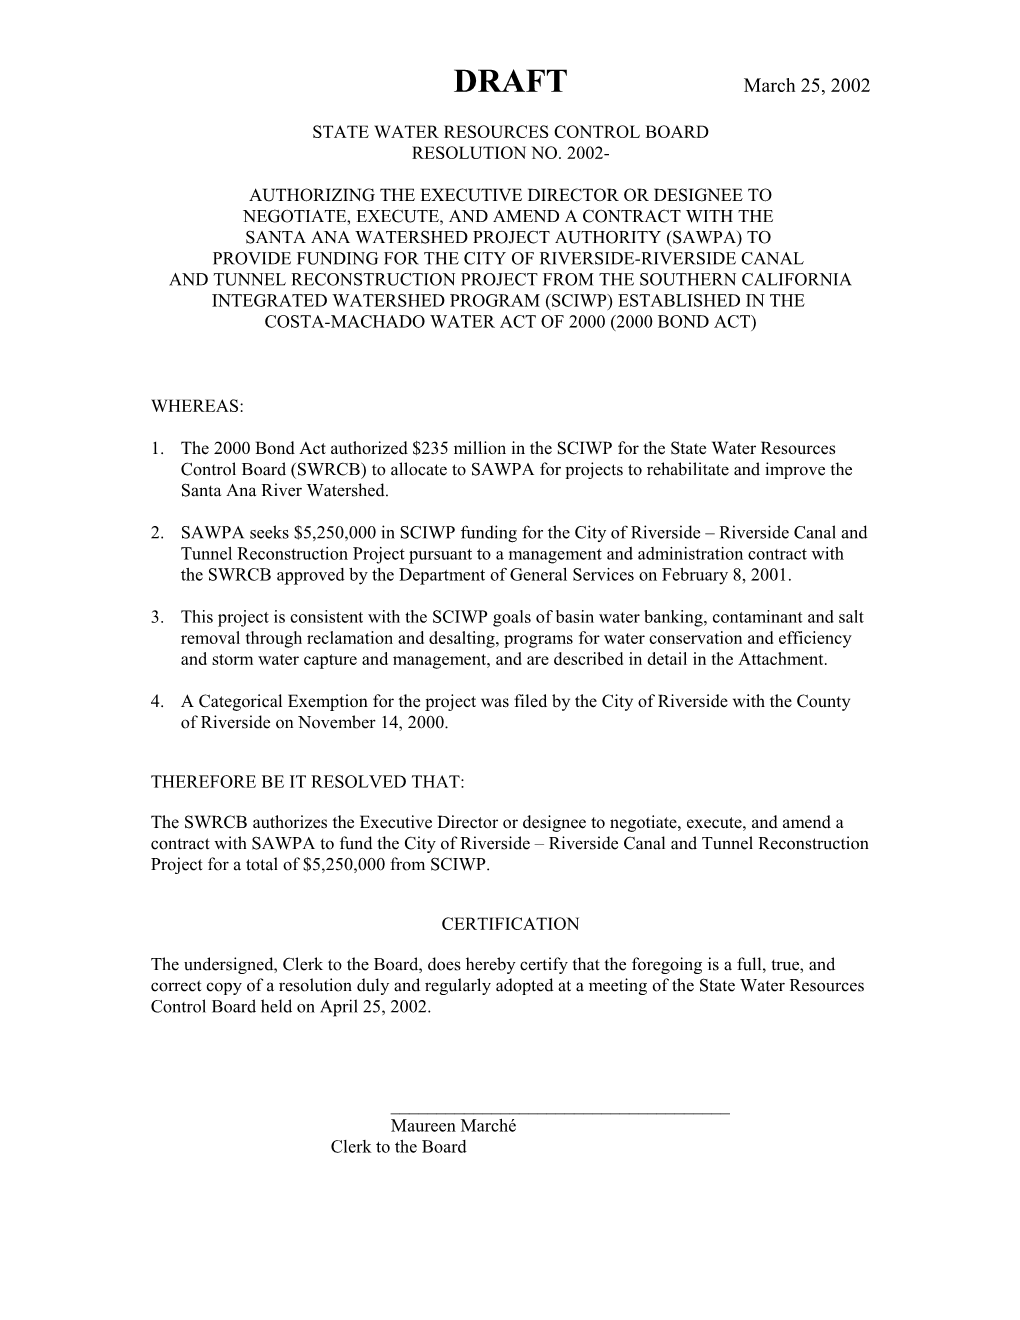 Contract with SAWPA/City of Riverside